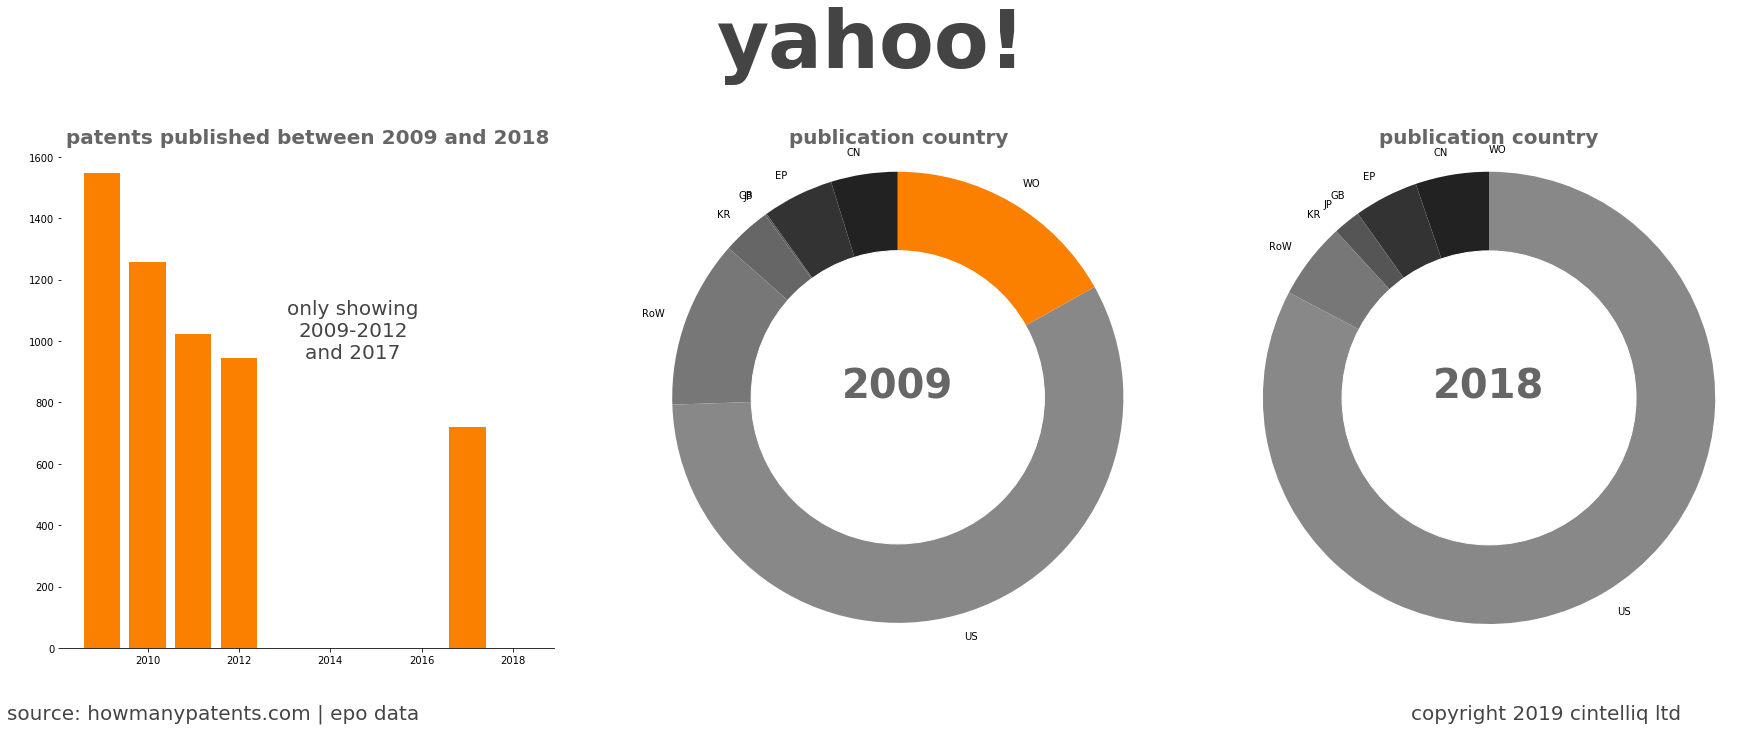 summary of patents for Yahoo!